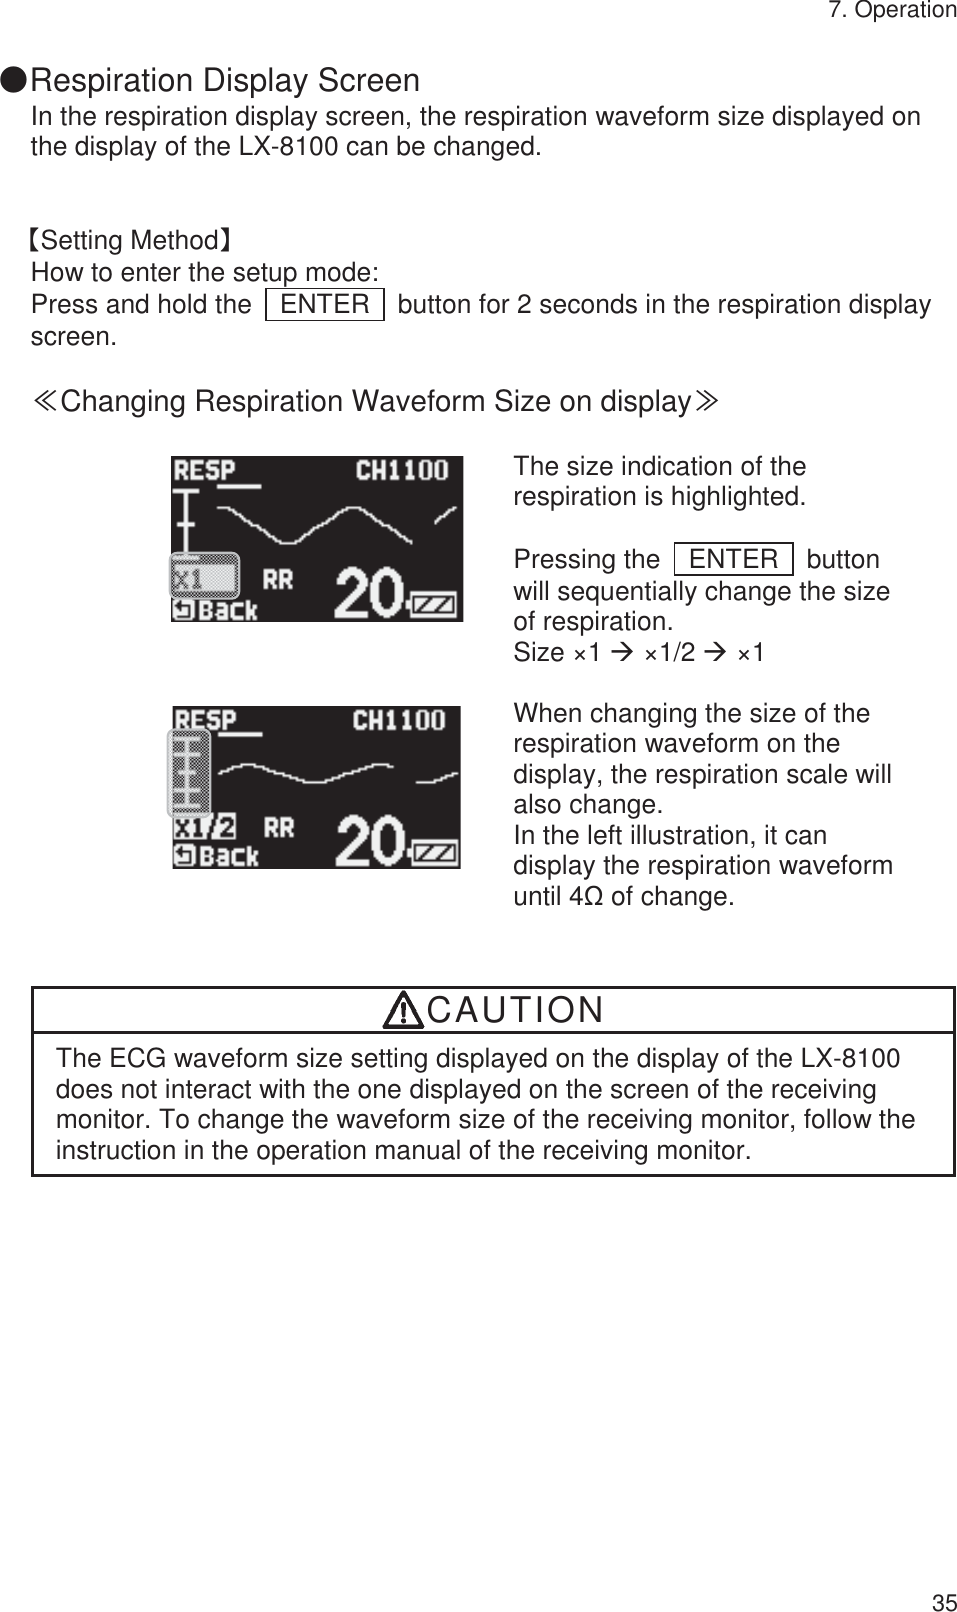 7. Operation 35 䖃Respiration Display Screen In the respiration display screen, the respiration waveform size displayed on the display of the LX-8100 can be changed.   ࠙Setting Methodࠚ How to enter the setup mode: Press and hold the    ENTER    button for 2 seconds in the respiration display screen.  䍾Changing Respiration Waveform Size on display䍿          The size indication of the respiration is highlighted.  Pressing the  ENTER  button will sequentially change the size of respiration. Size ×1 Æ ×1/2 Æ ×1     When changing the size of the respiration waveform on the display, the respiration scale will also change. In the left illustration, it can display the respiration waveform until 4ȍ of change.   CAUTION The ECG waveform size setting displayed on the display of the LX-8100 does not interact with the one displayed on the screen of the receiving monitor. To change the waveform size of the receiving monitor, follow the instruction in the operation manual of the receiving monitor.   